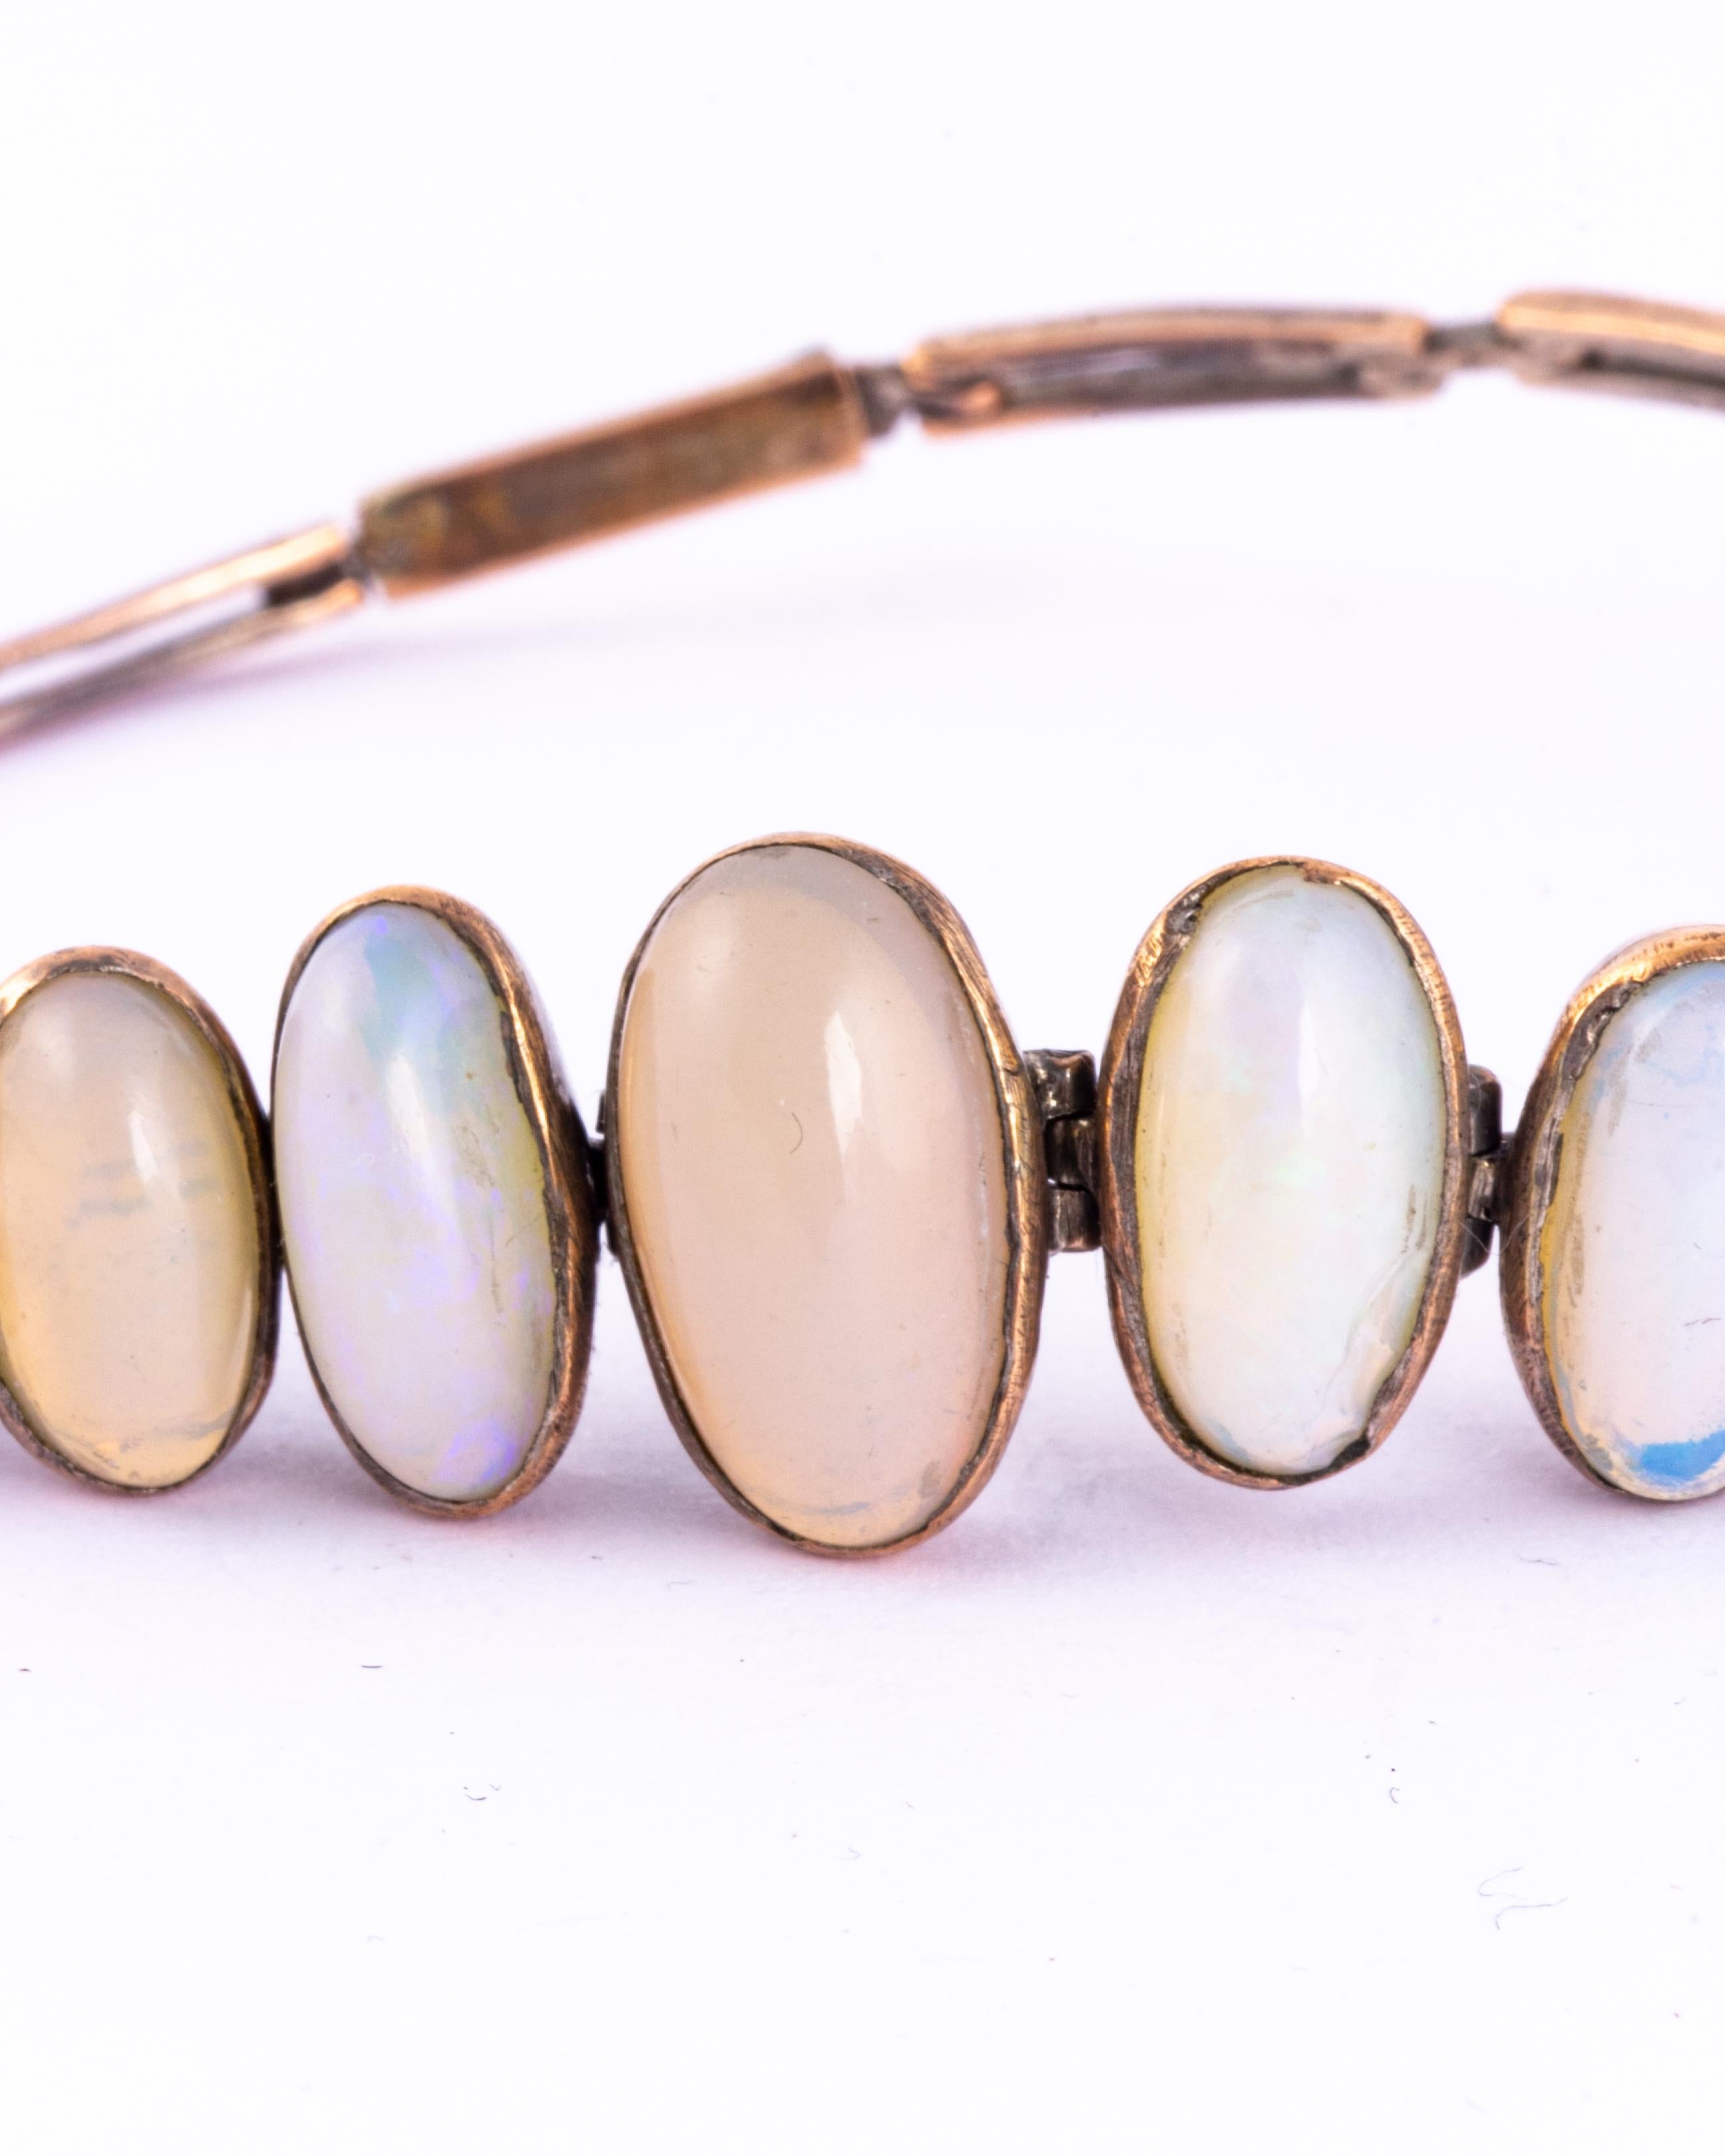 This gorgeous bracelet holds nine graduated opals with the largest at the centre of the row. The bracelet chains and stones are modelled in 9carat gold. 

Length: 17cm
Stone Dimensions: 14x8mm - 9x5mm 

Weight: 8.8g